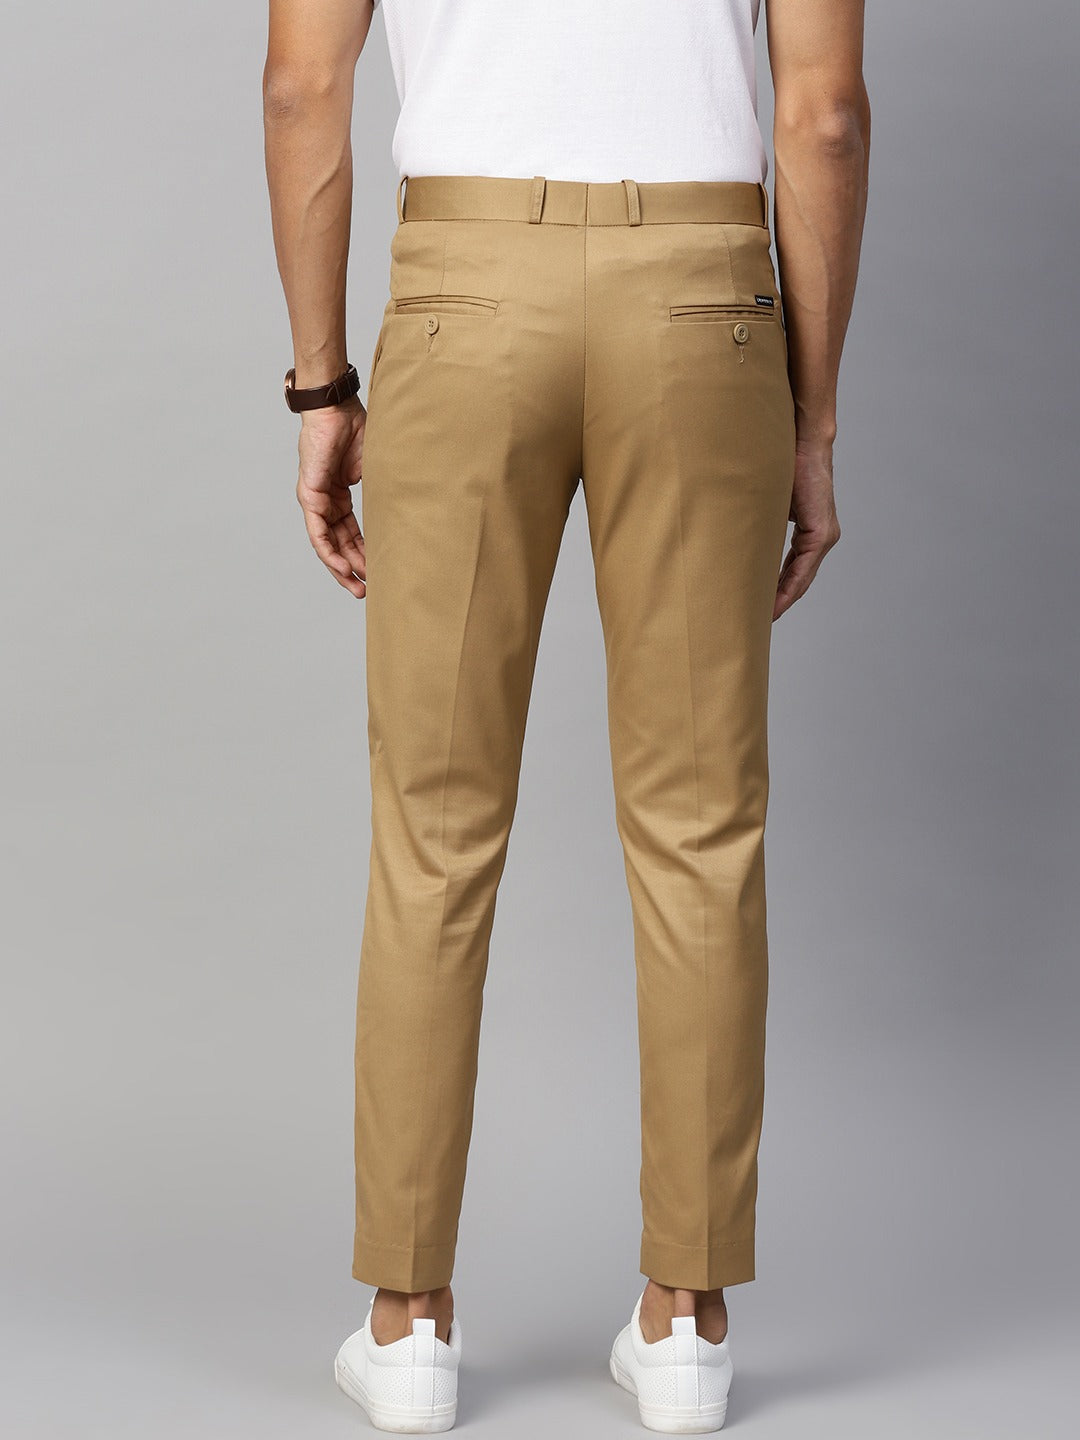 Buy Striped Slim Fit Cropped Trousers Online at Best Prices in India   JioMart